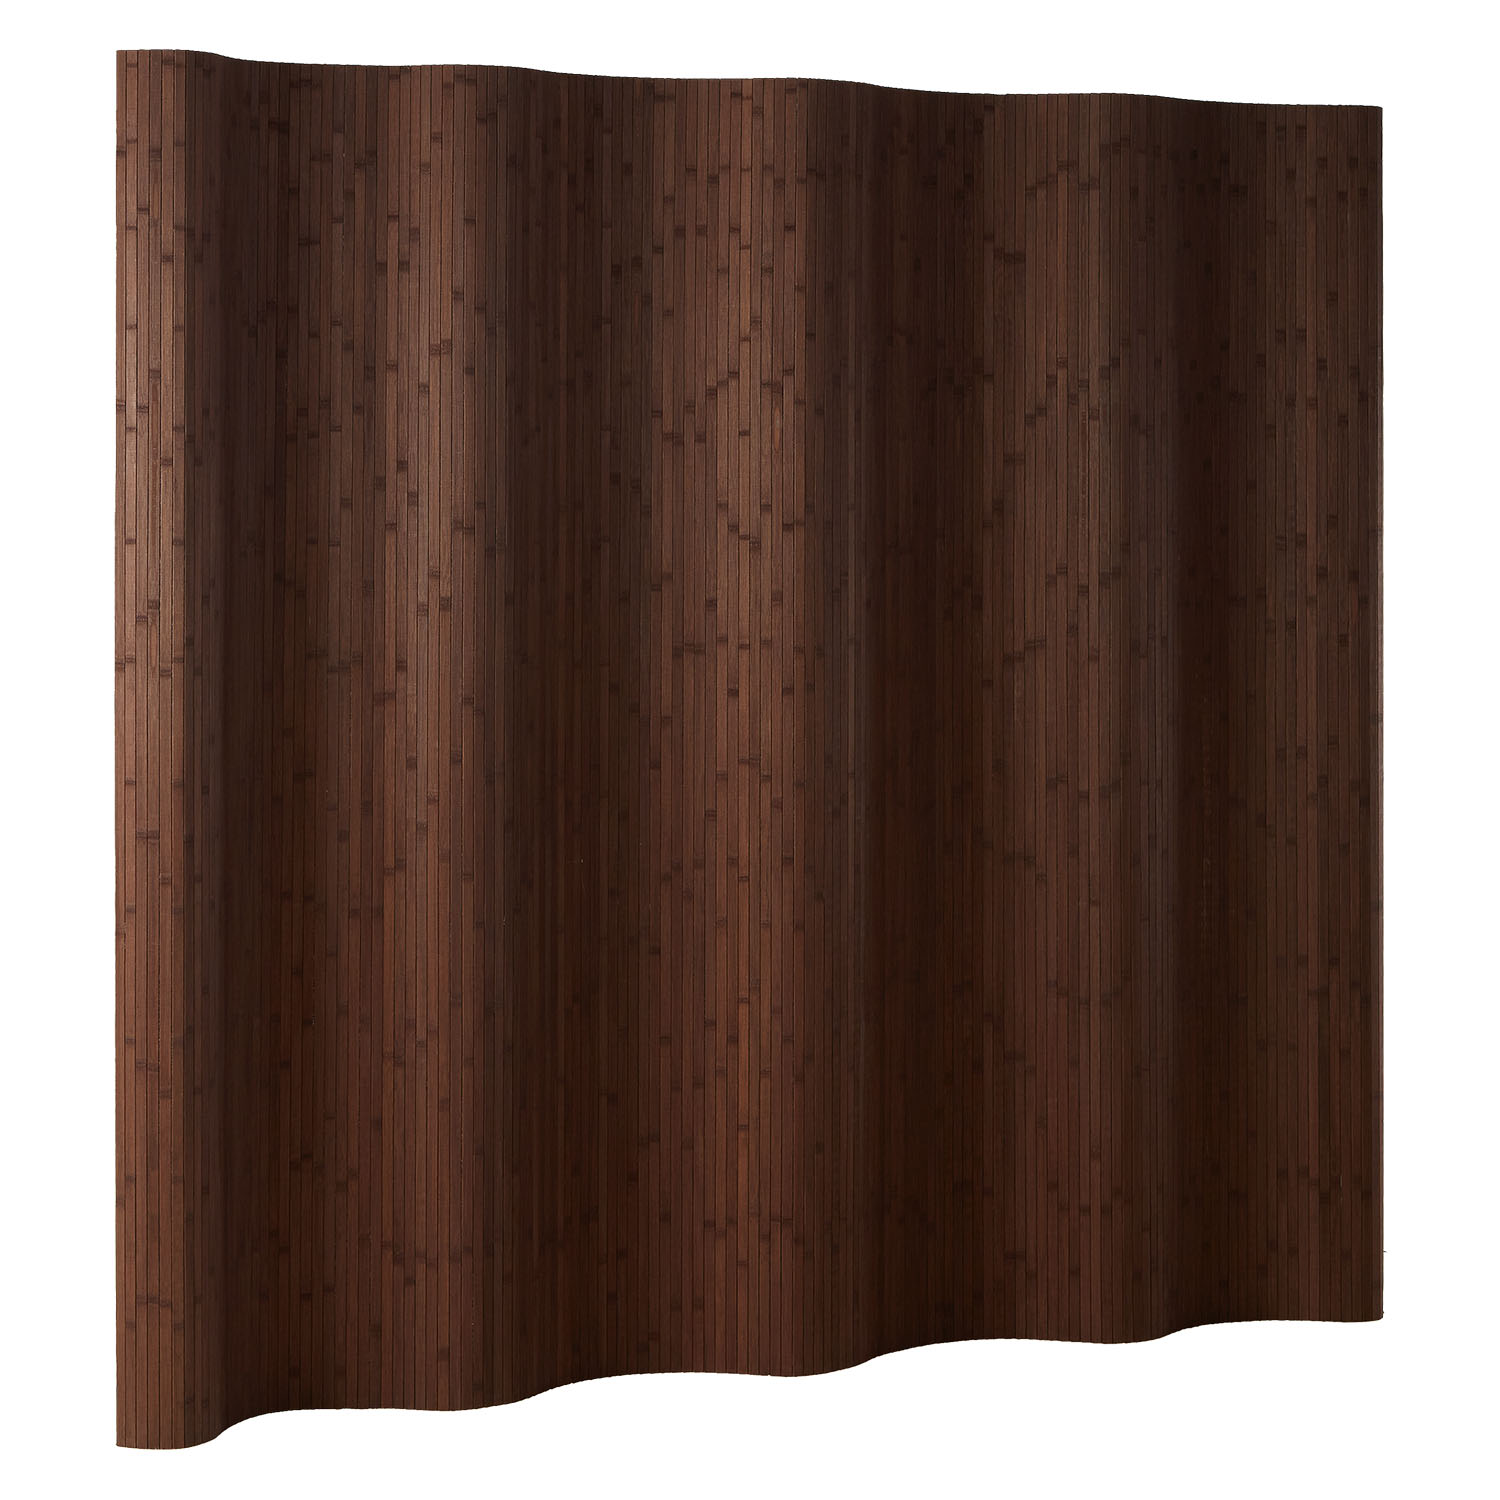 Paravent Room Divider Bamboo 200 x 250 cm Privacy Screen Spanish Wall Dark Brown